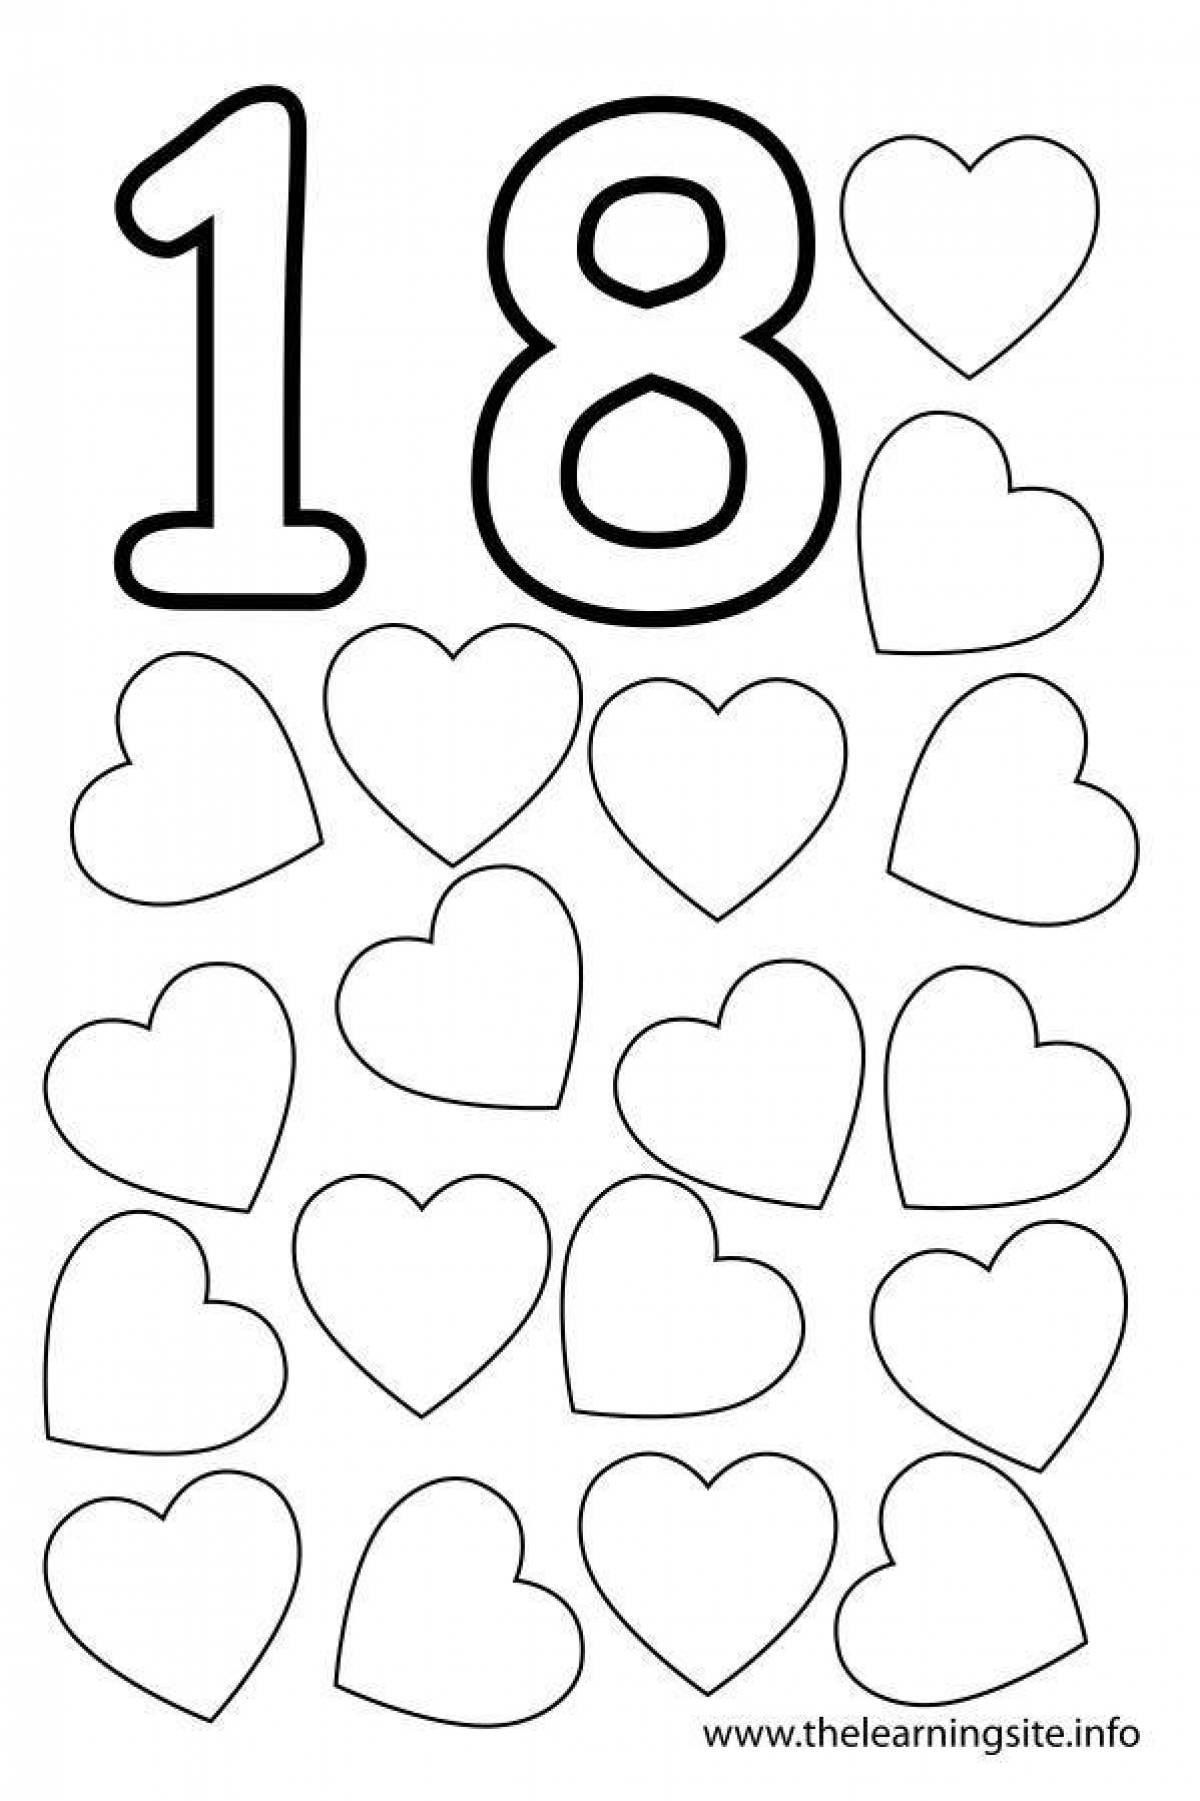 Colorful 18 years old coloring page